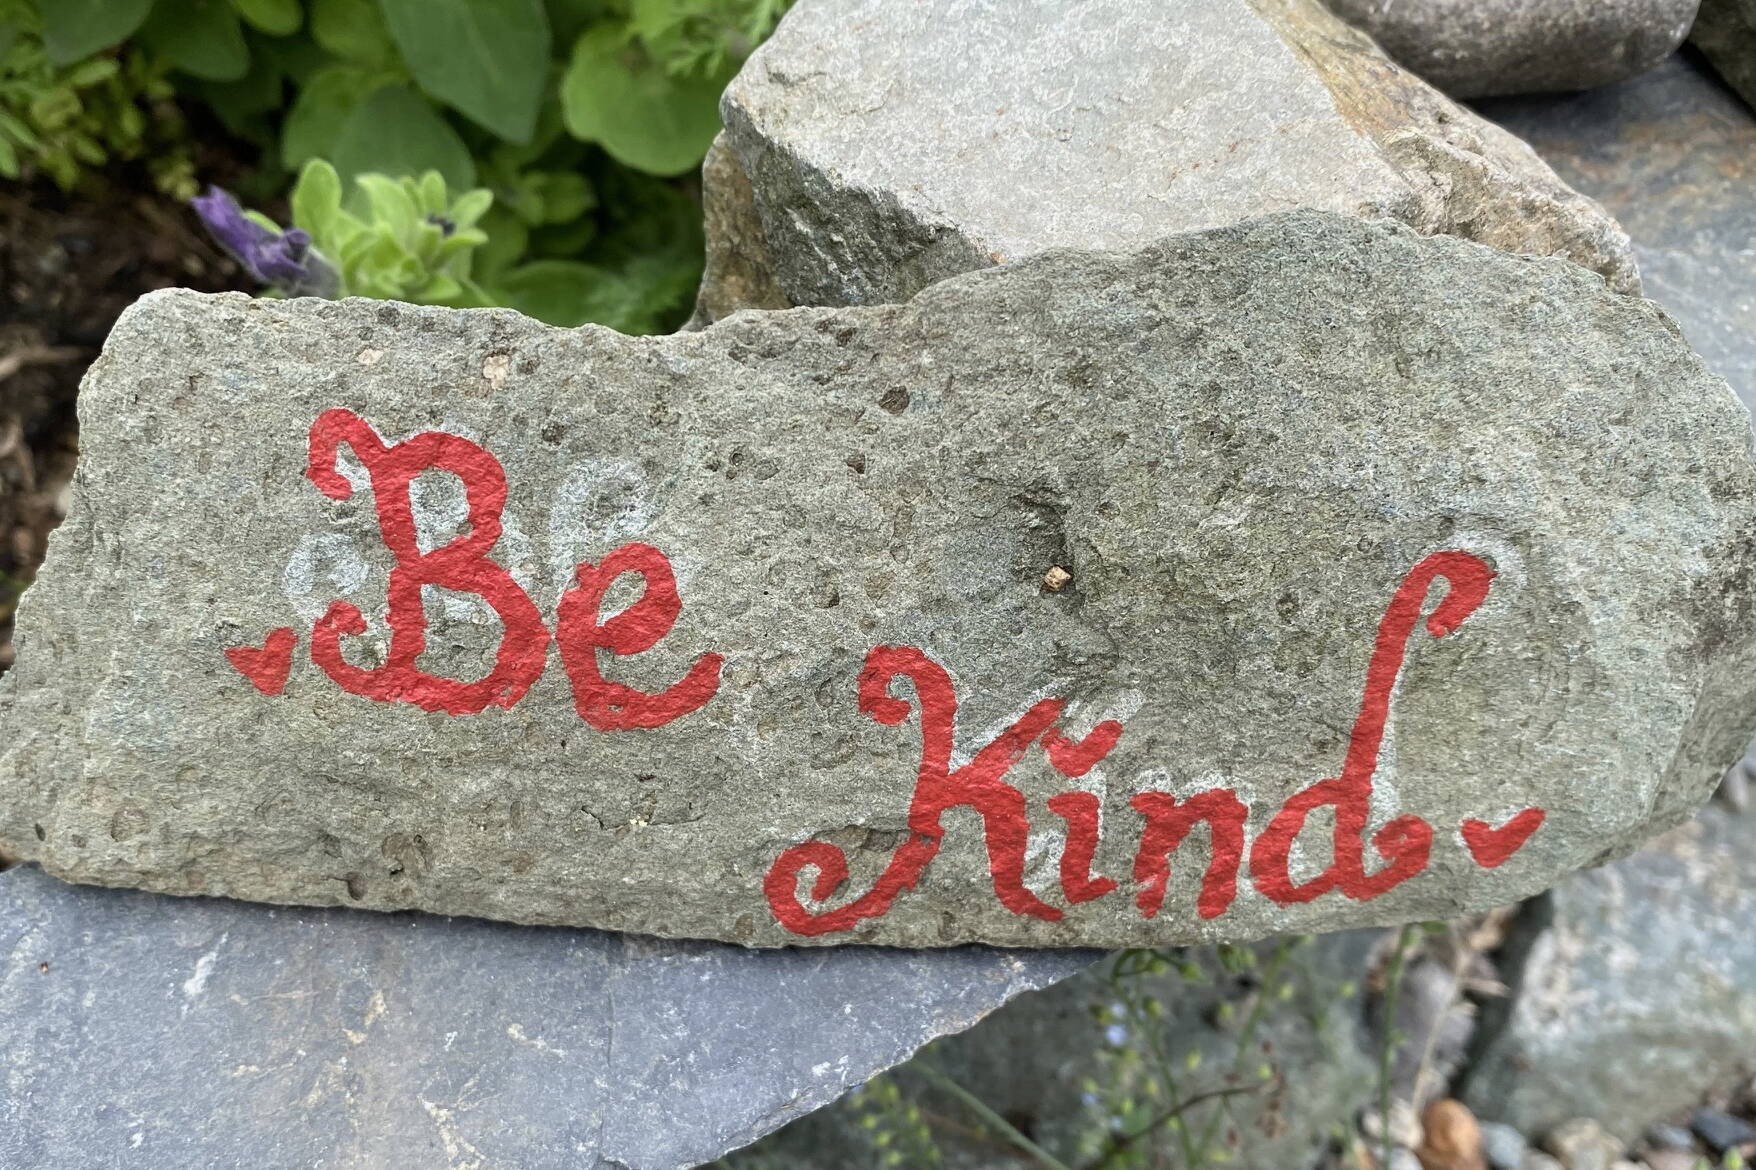 Good advice for everyone seen in a Gold Street garden on Aug. 4. (Photo by Denise Carroll)